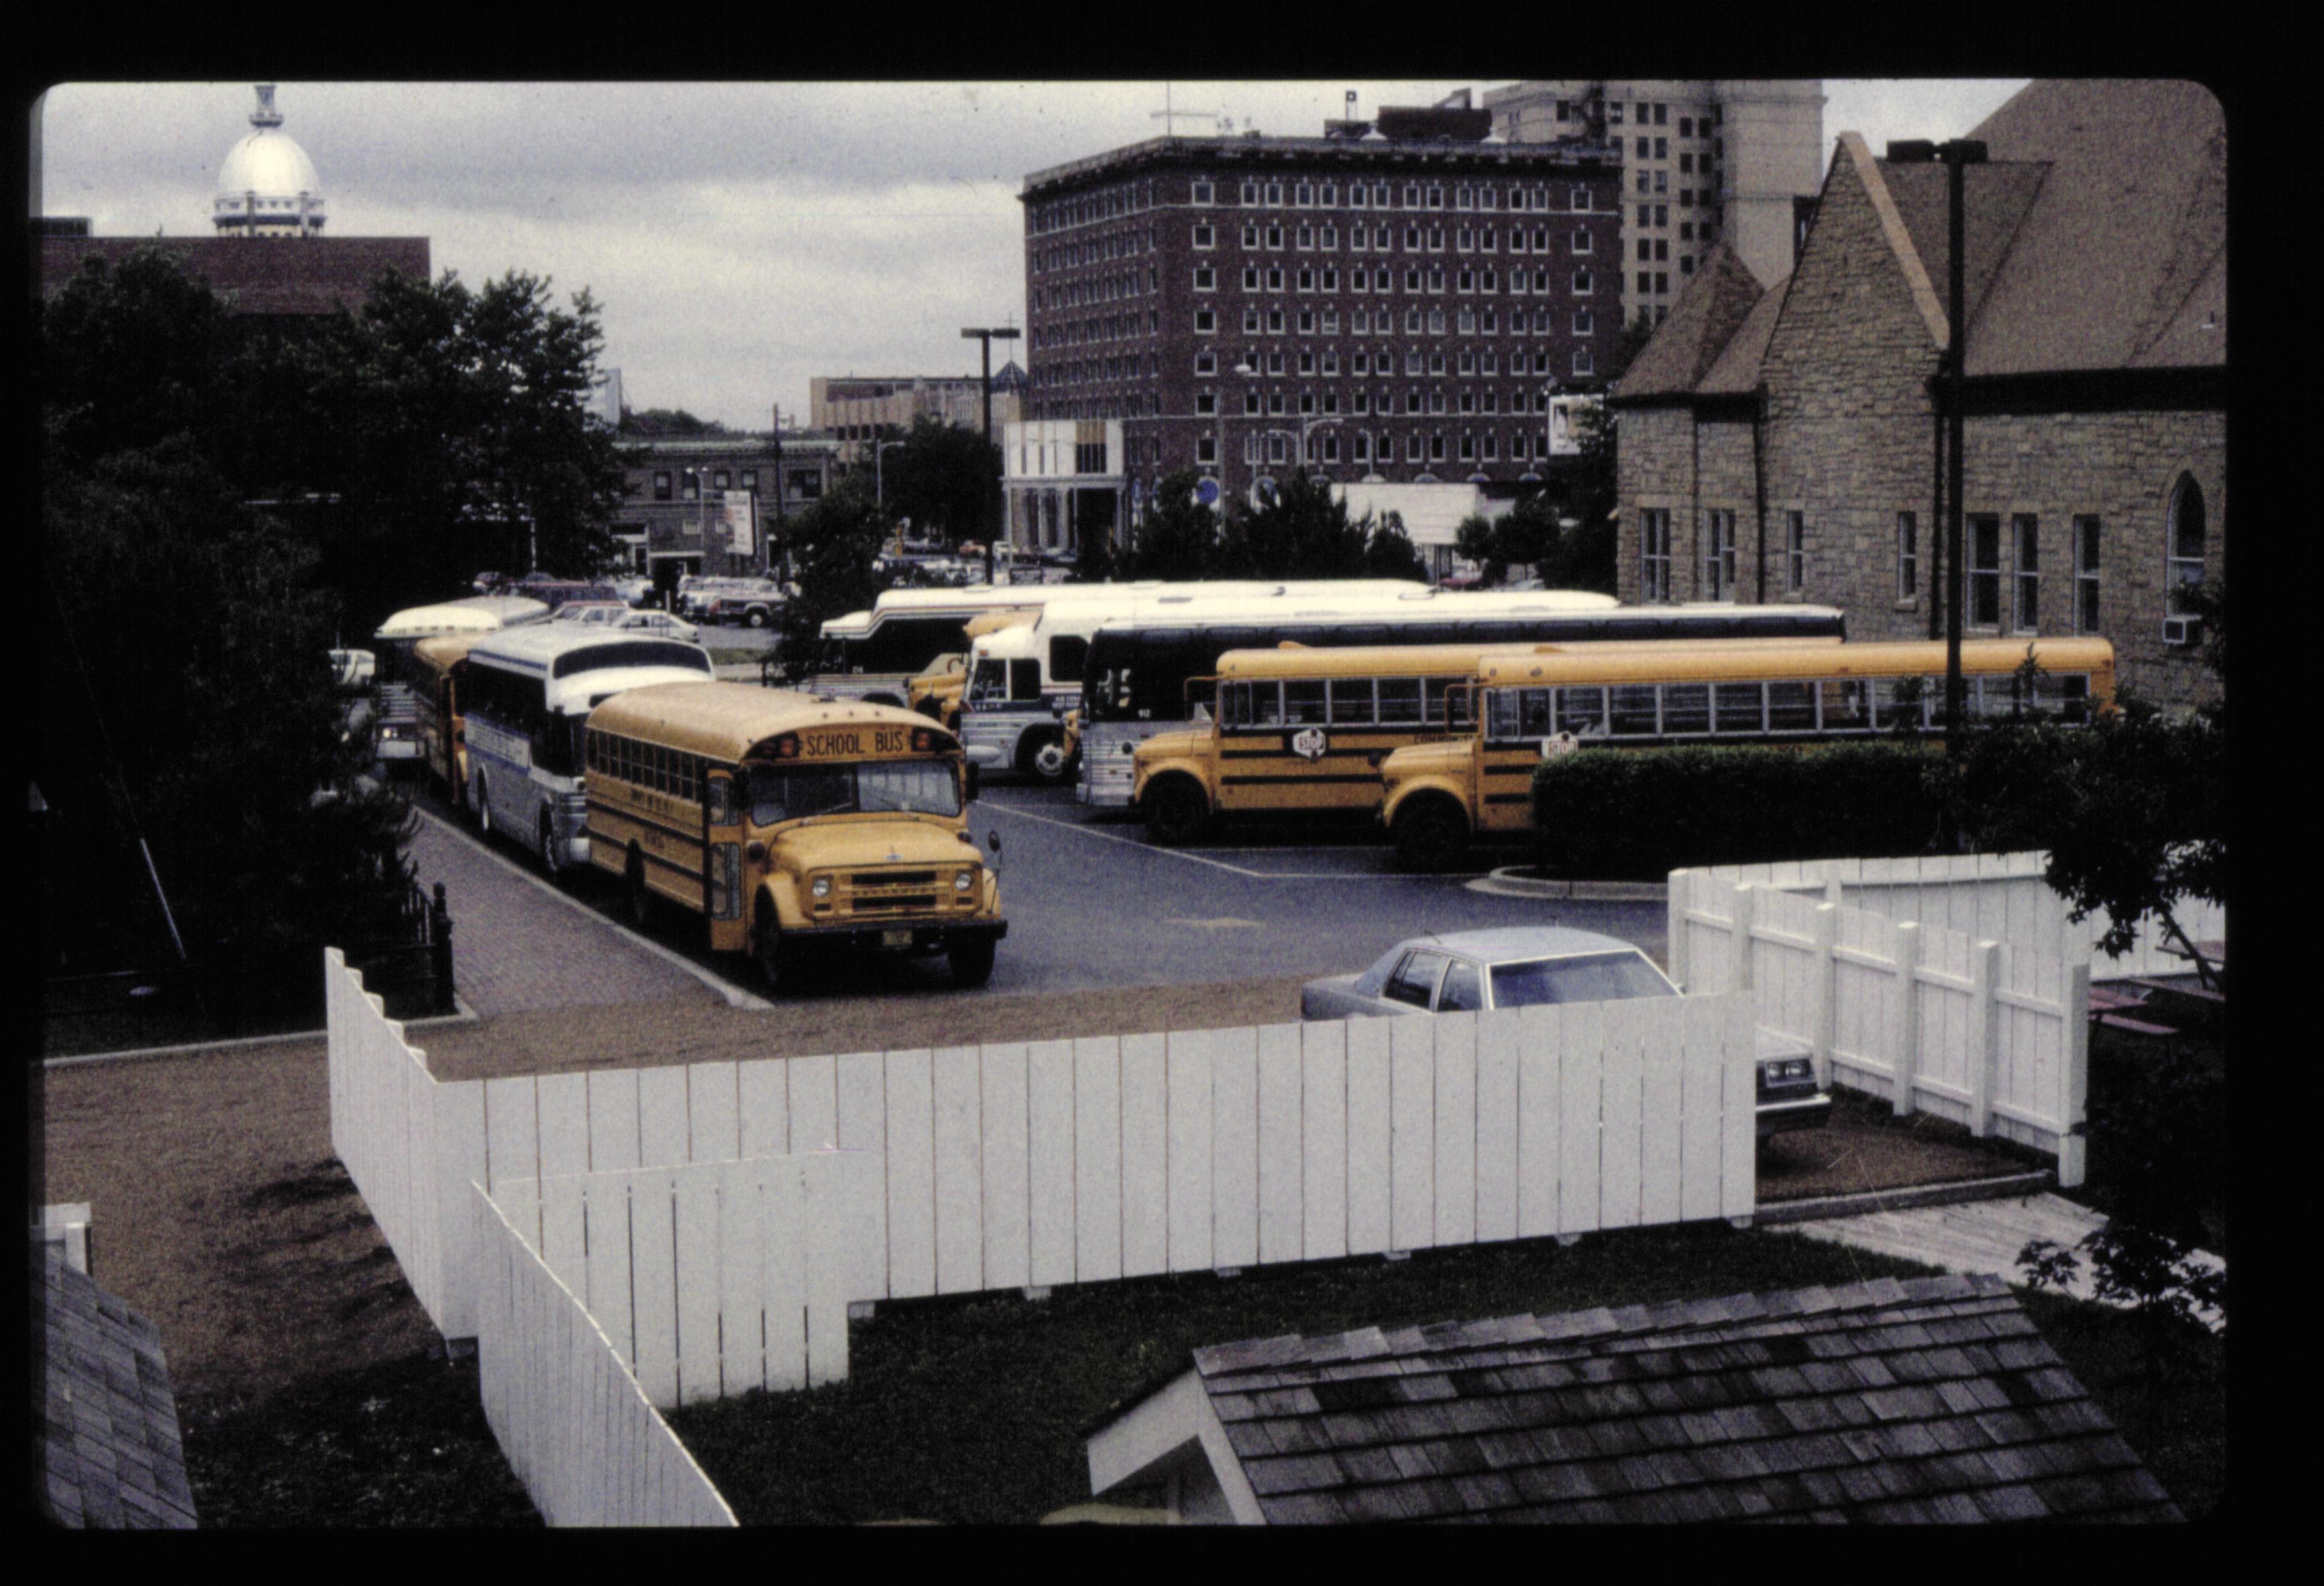 Parking lots - bus parking lot, Grace Lutheran Churd on right, former Lelan Hotel in background center, Capitol Dome on left looking Northwest buses, parking lot, Grace Lutheran Church, State Capitol